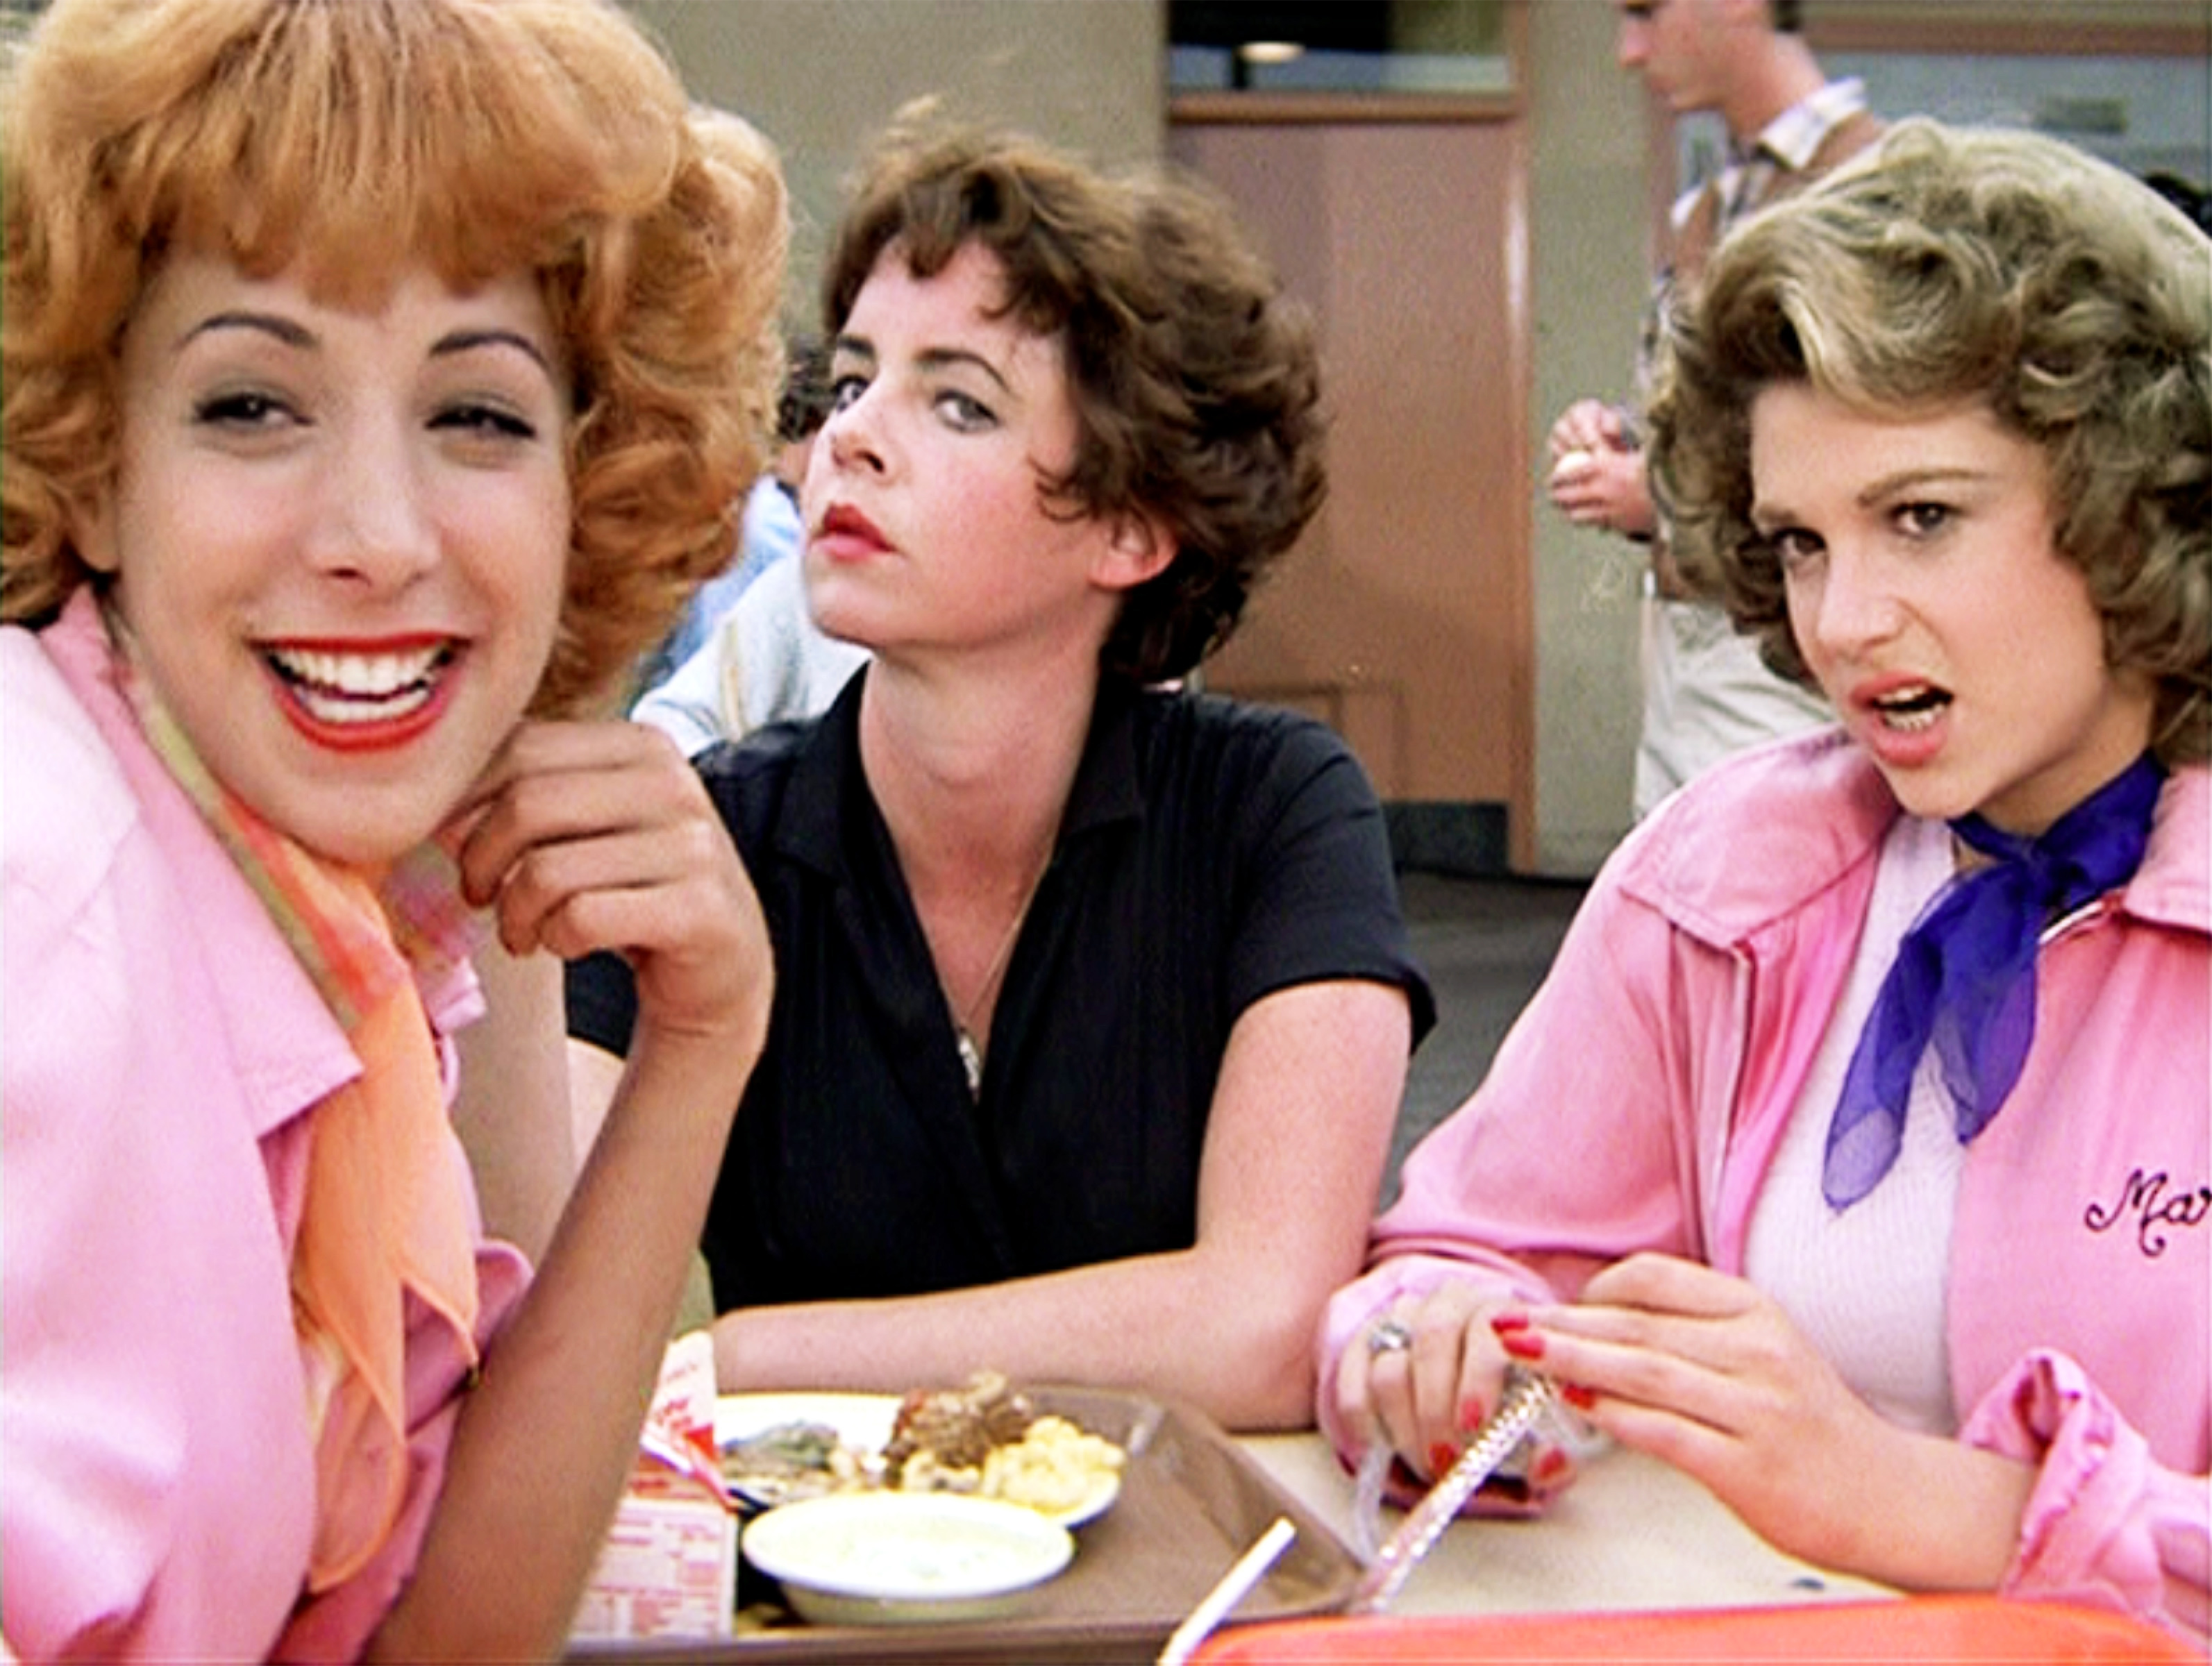 Didi Conn, Stockard Channing and Dinah Manoff on the set of "Grease," 1978 | Source: Getty Images